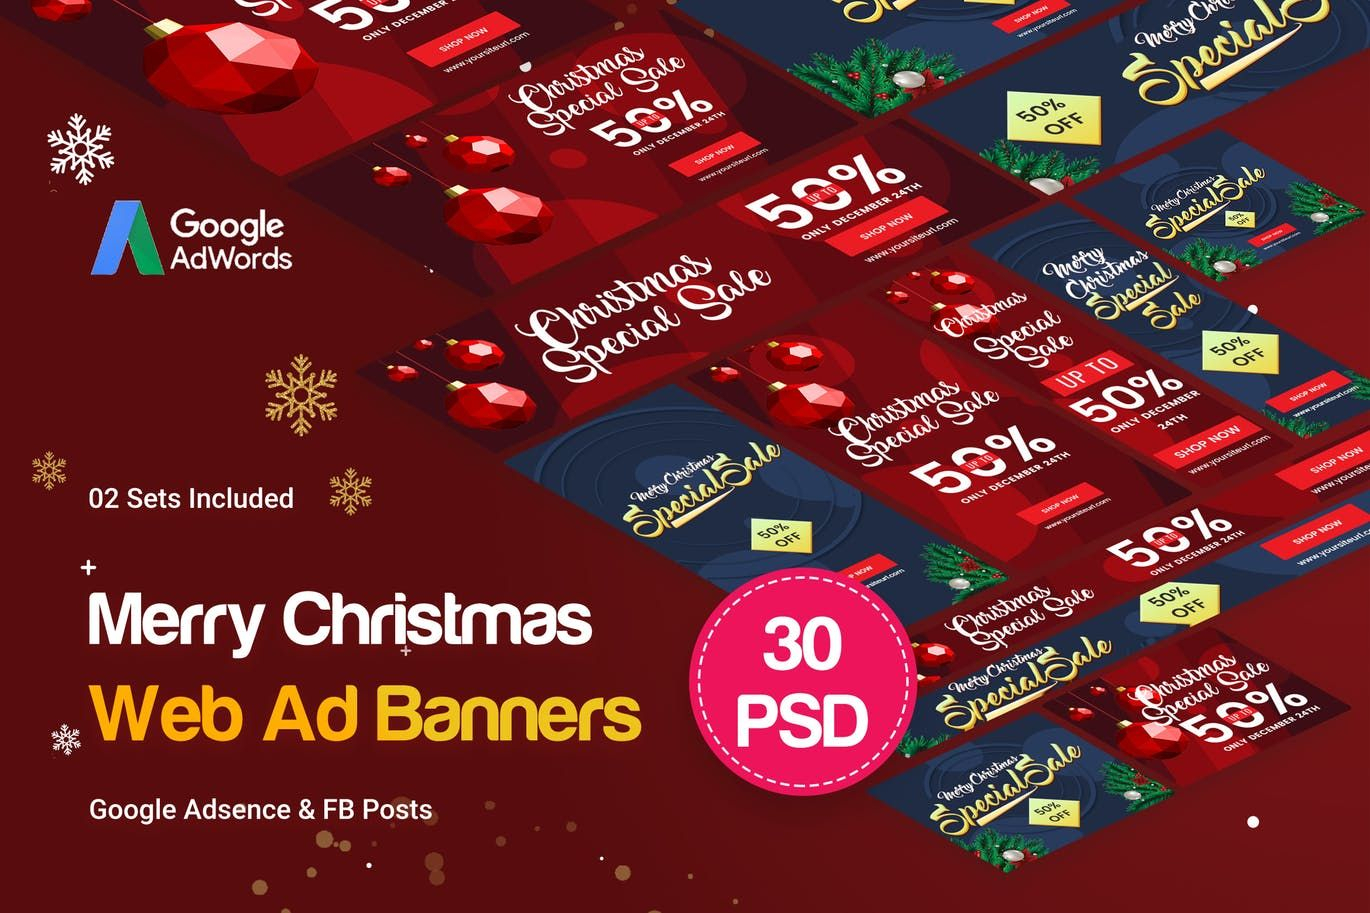 Merry Christmas Banners Ad Template Psd. Download | Web In Merry Christmas Banner Template